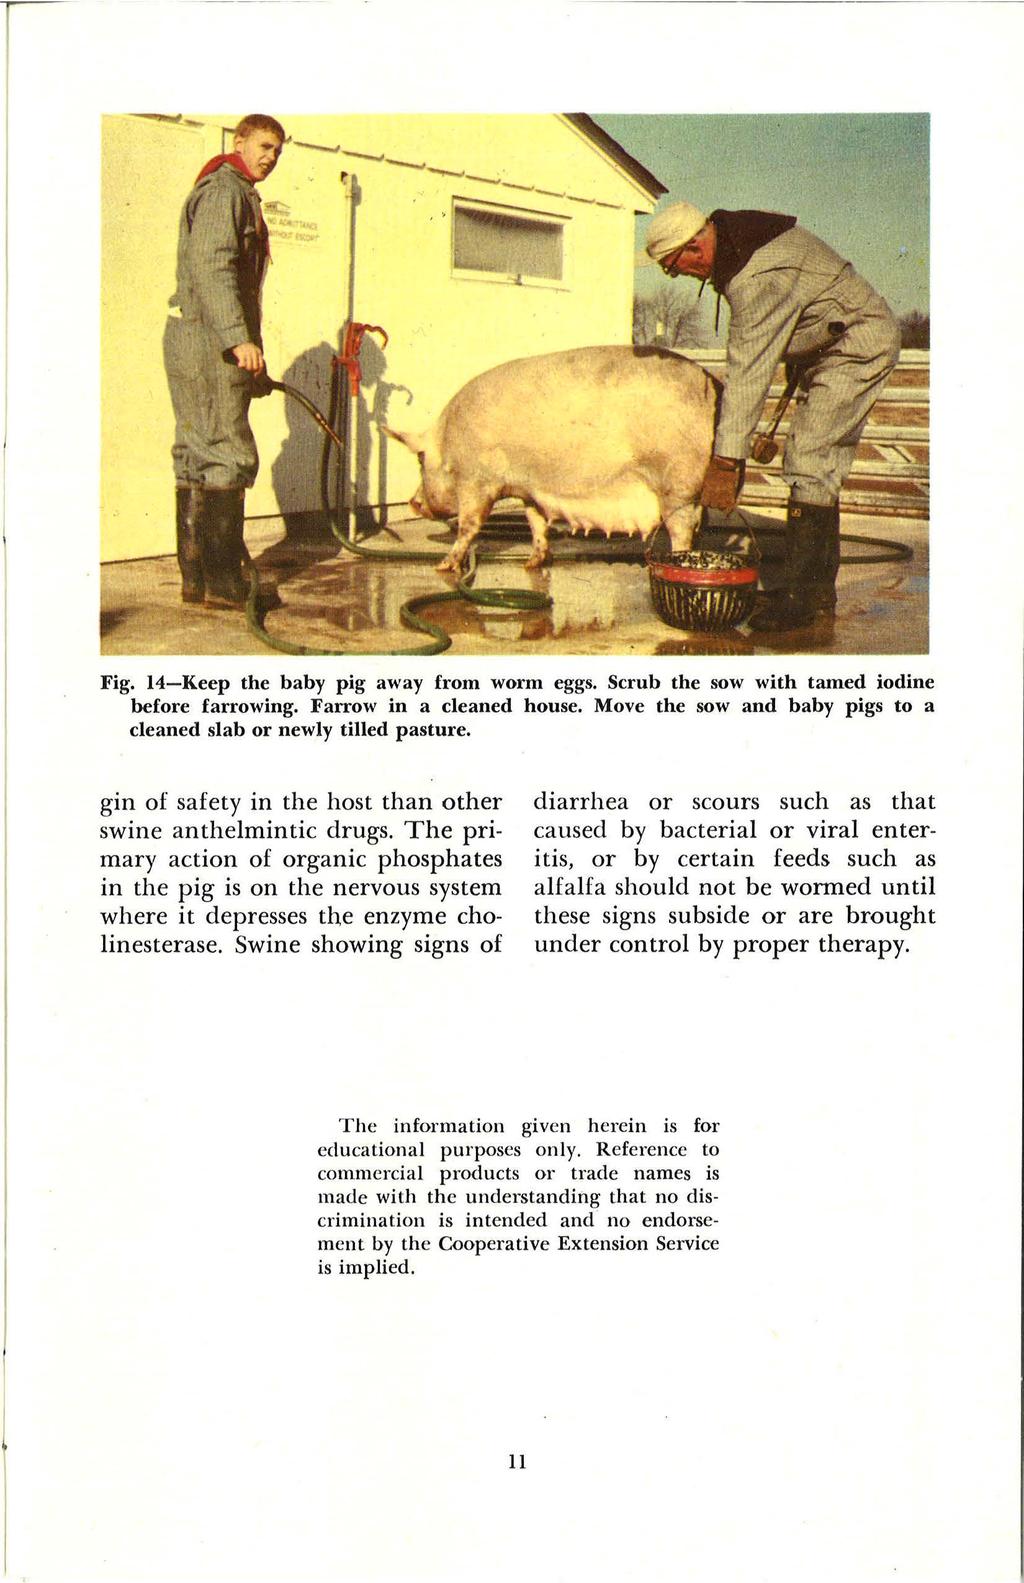 Fig. 14-Keep the baby pig away from worm eggs. Scrub the sow with tamed iodine before farrowing. Farrow in a cleaned house. Move the sow and baby pigs to a cleaned slab or newly tilled pasture.